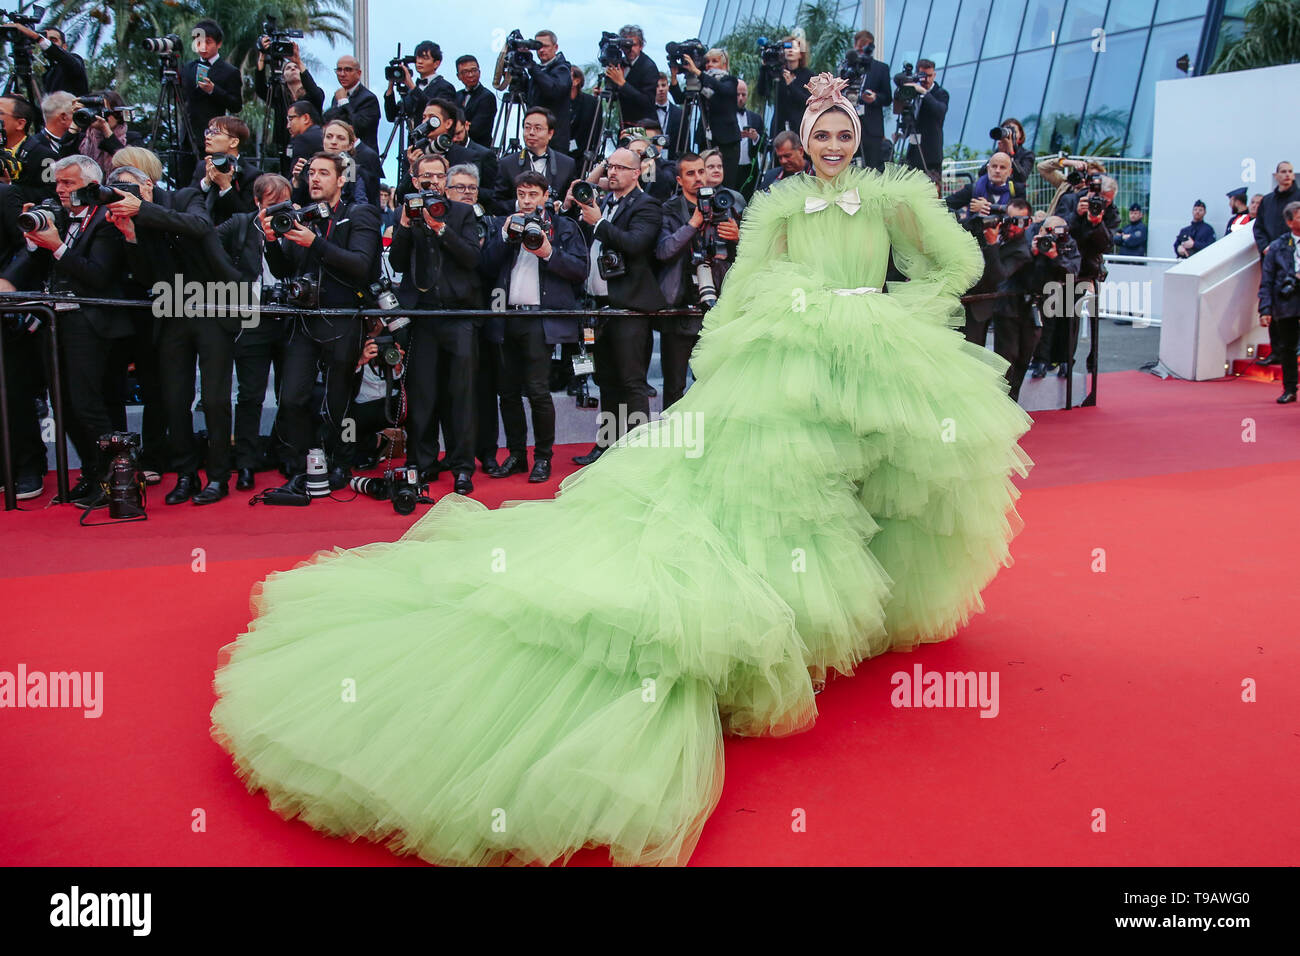 Cannes, France. 17th May, 2019. Indian actress Deepika Padukone poses on the red carpet for the premiere of the film 'Dolor y Gloria' at the 72nd Cannes Film Festival in Cannes, France, on May 17, 2019. The 72nd Cannes Film Festival is held here from May 14 to 25. Credit: Zhang Cheng/Xinhua/Alamy Live News Stock Photo